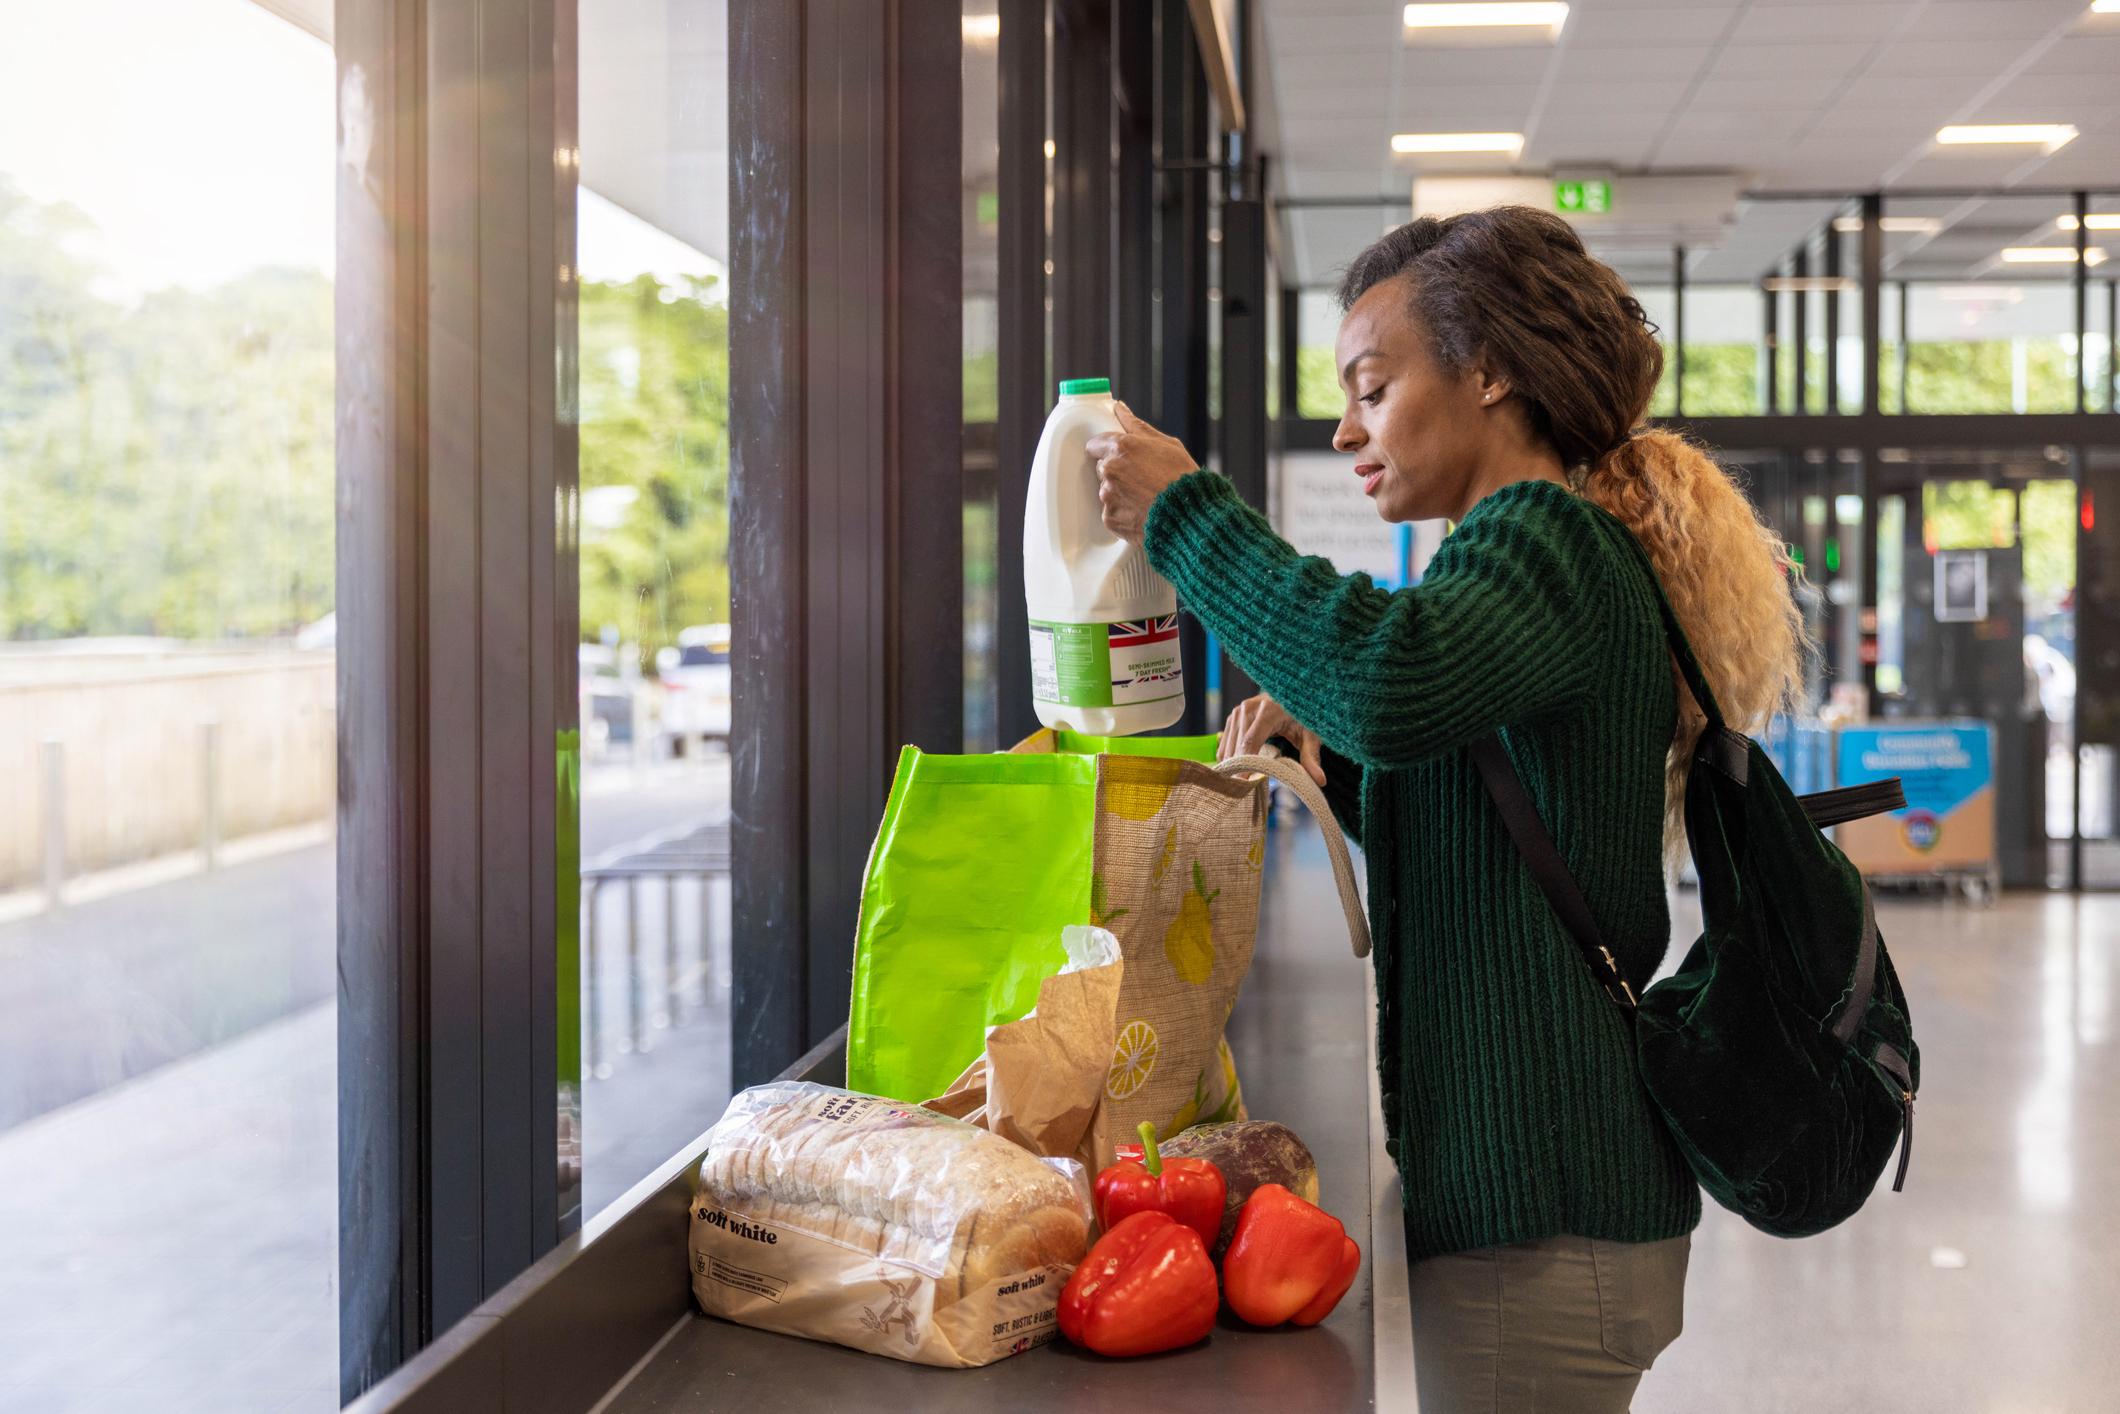 Woman packing her shopping into a reusable bag in a budget supermarket.